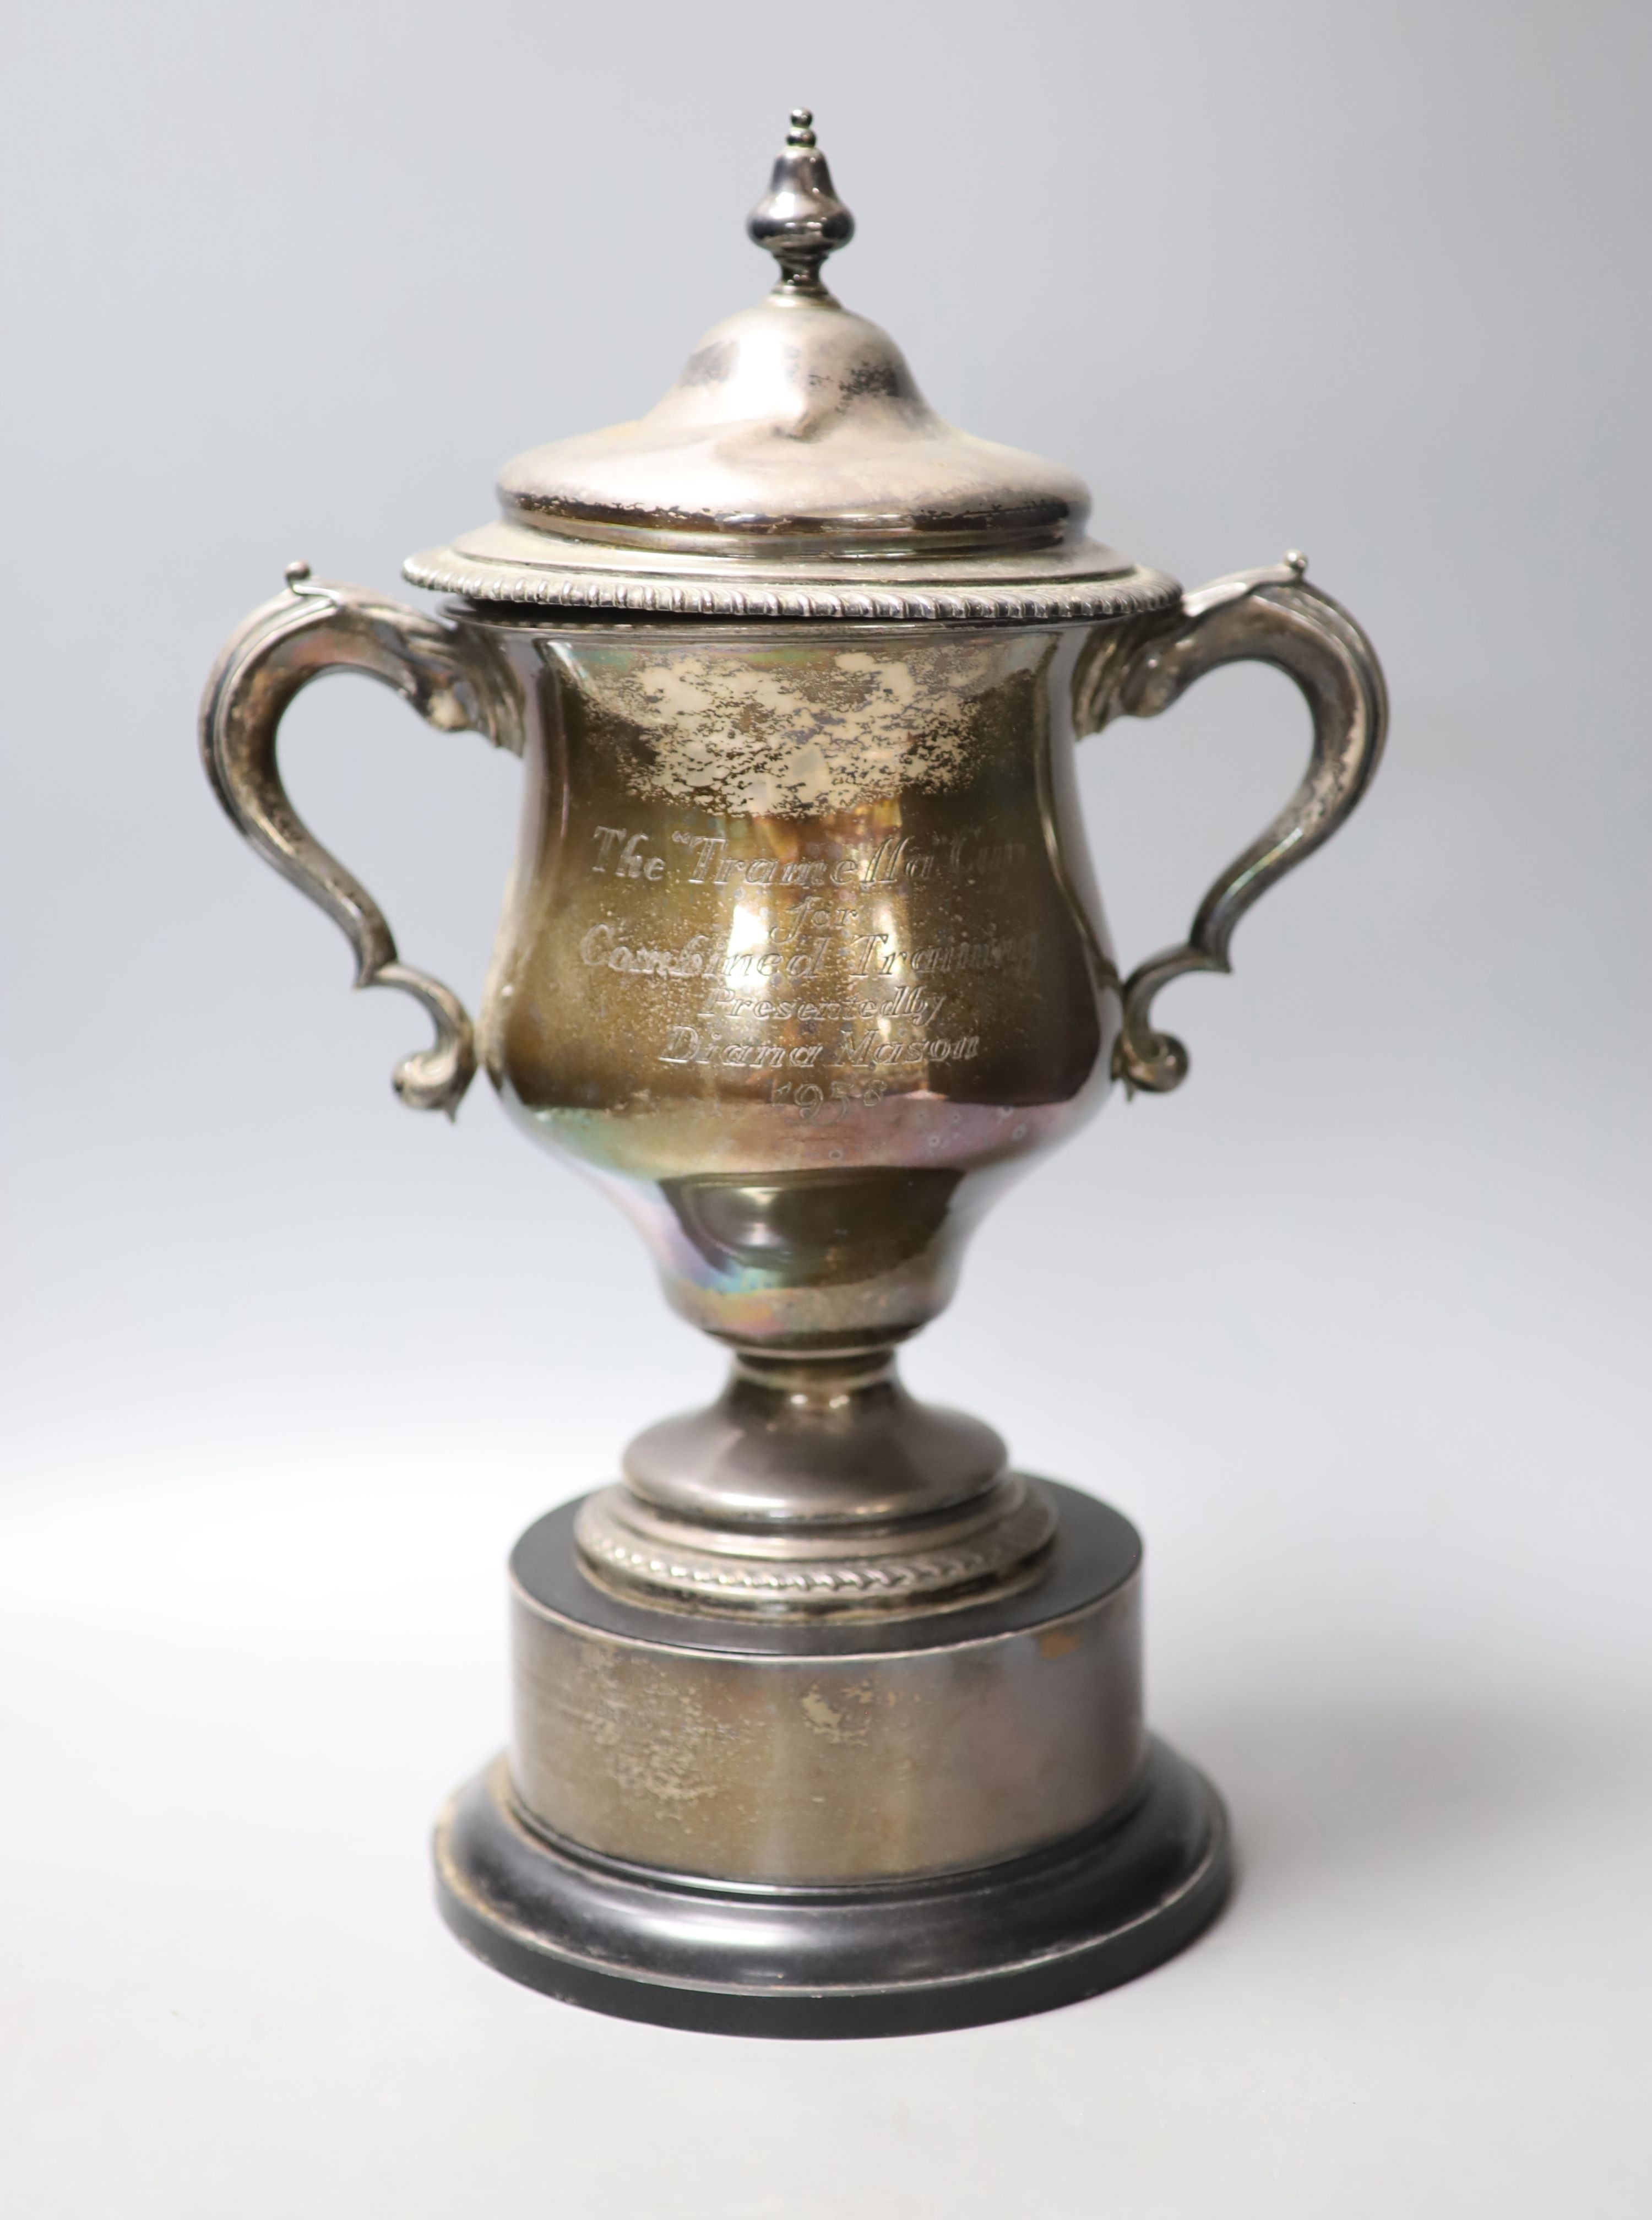 An Edwardian silver two handle presentation trophy cup and cover(a.f.) with later engraved inscription, Martin, Hall & Co, Sheffield, 1909, fixed to wooden socle, cup and cover height 30.4cm, cover 10.5oz.